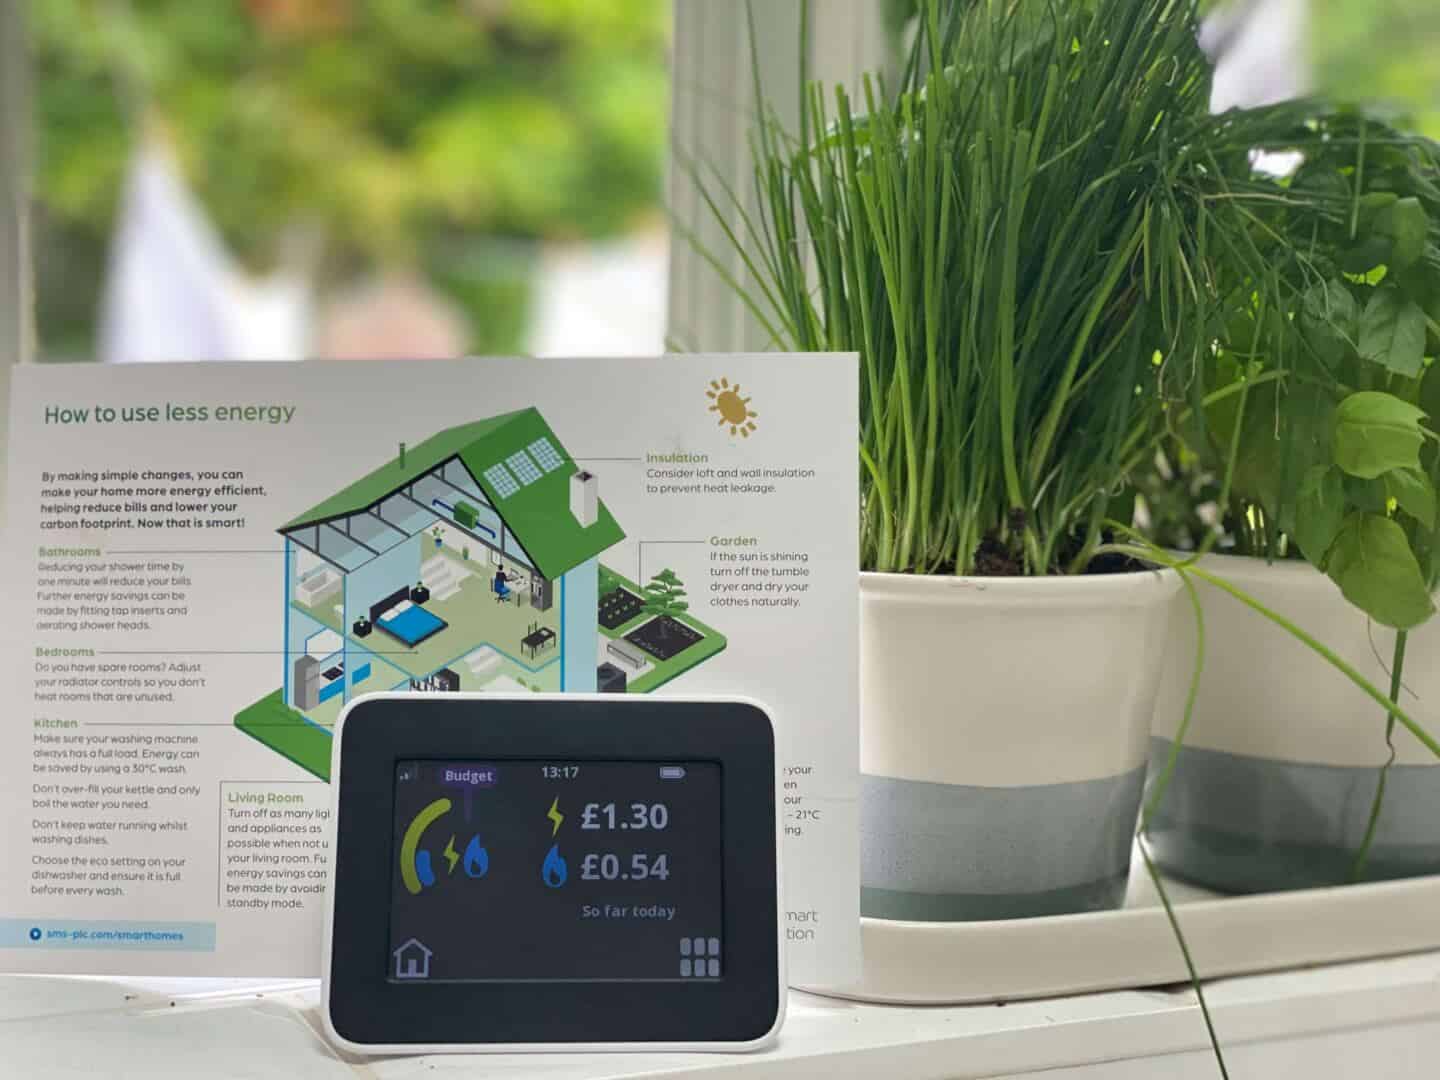 A smart meter and a leaflet about energy saving tips on a windowsill next to some pots of herbs